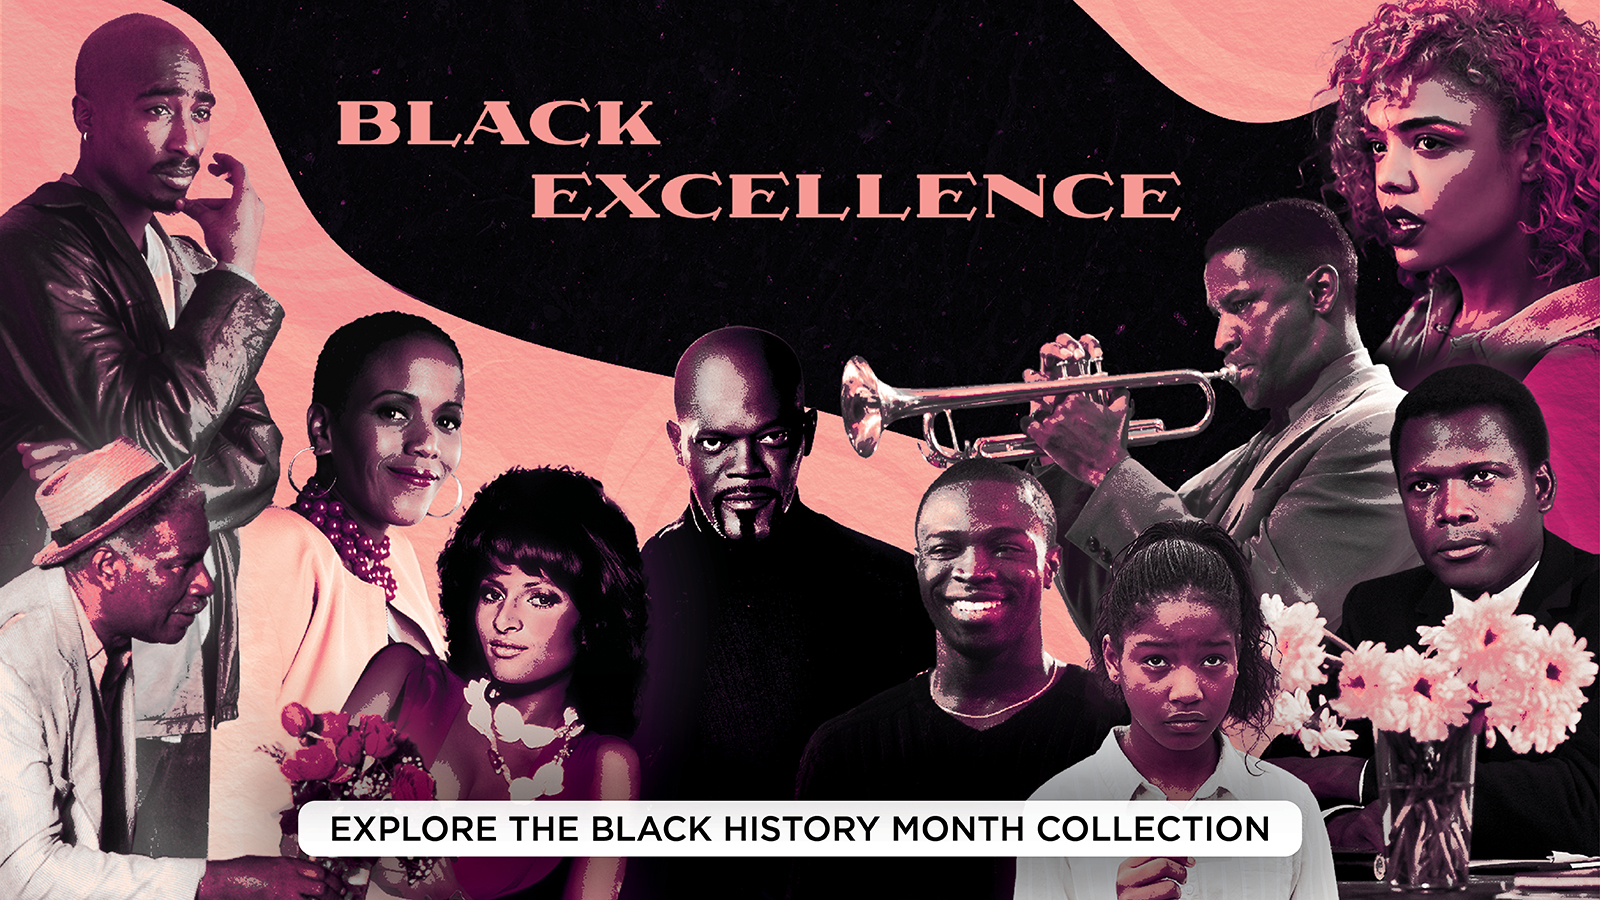 Black Excellence – Explore the Black History Month Collection